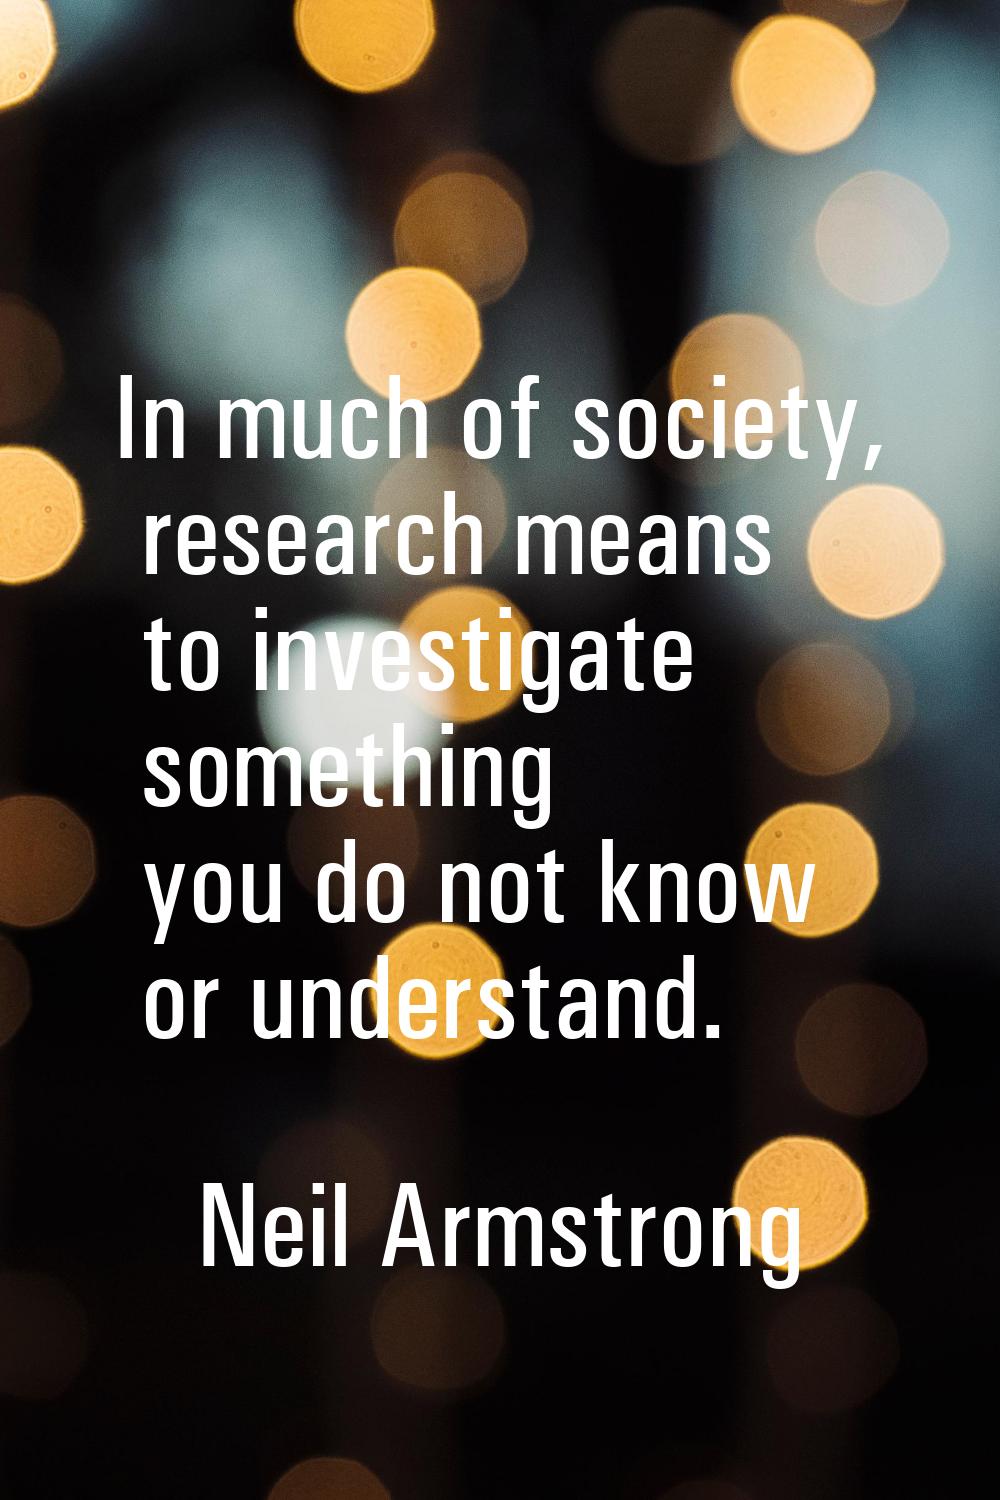 In much of society, research means to investigate something you do not know or understand.